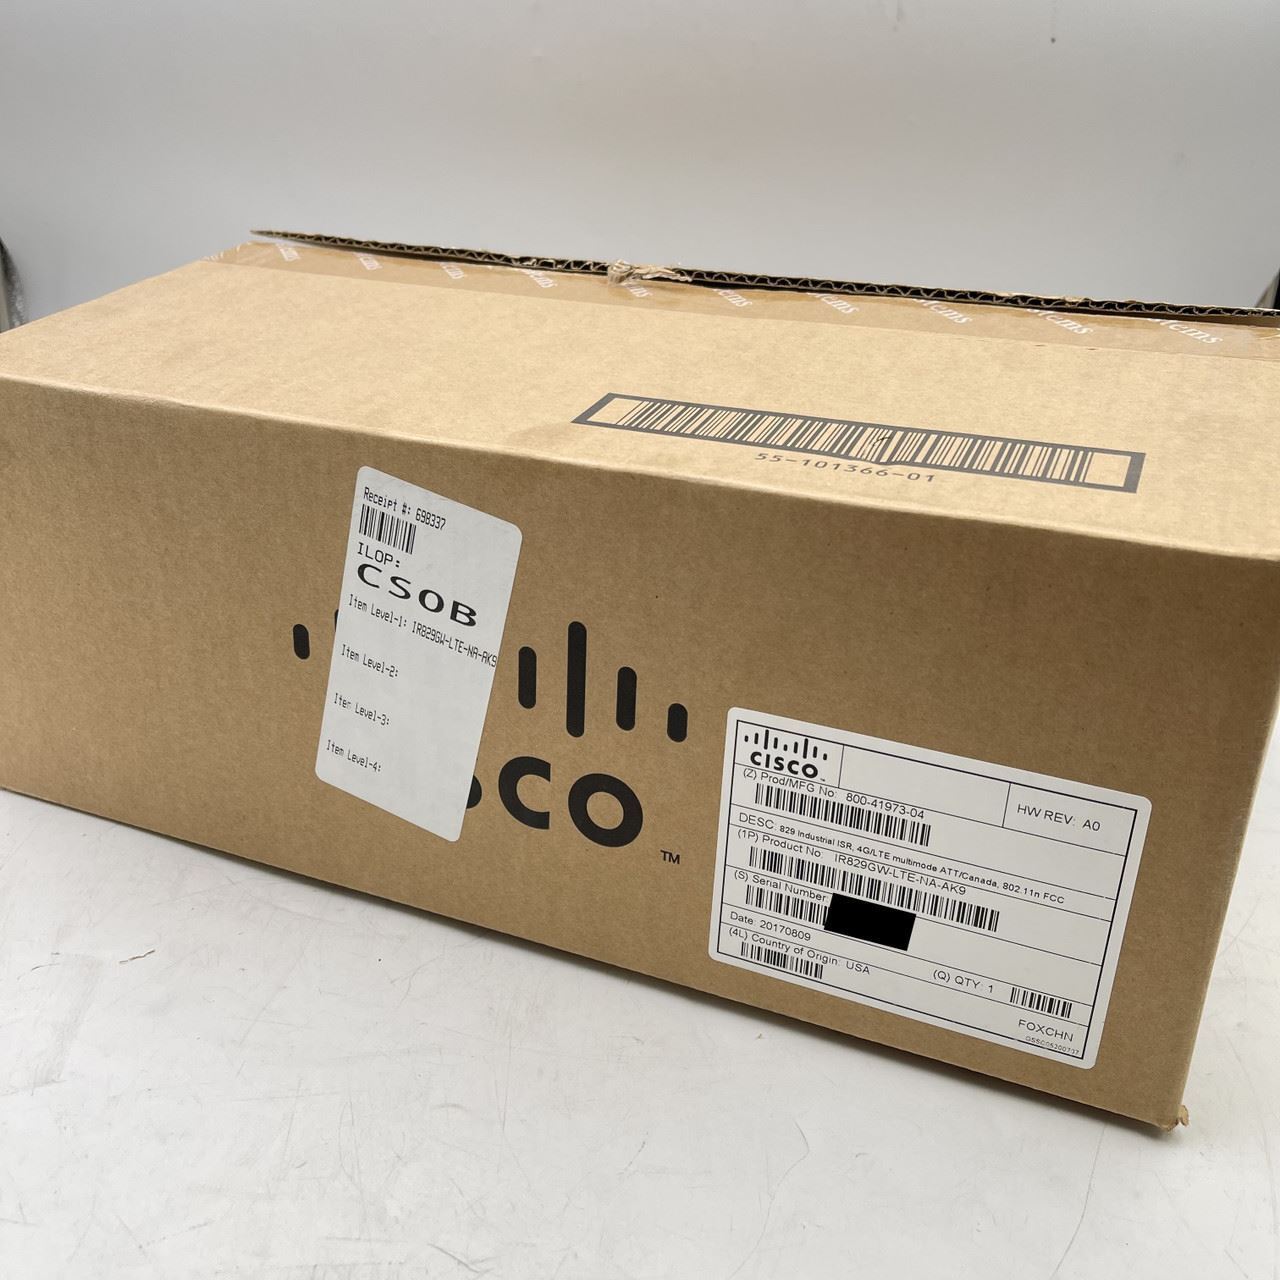 CISCO IR829GW-LTE-NA-AK9 V02 AT&T LTE INTEGRATED SERVICES ROUTER -NEW OPEN BOX